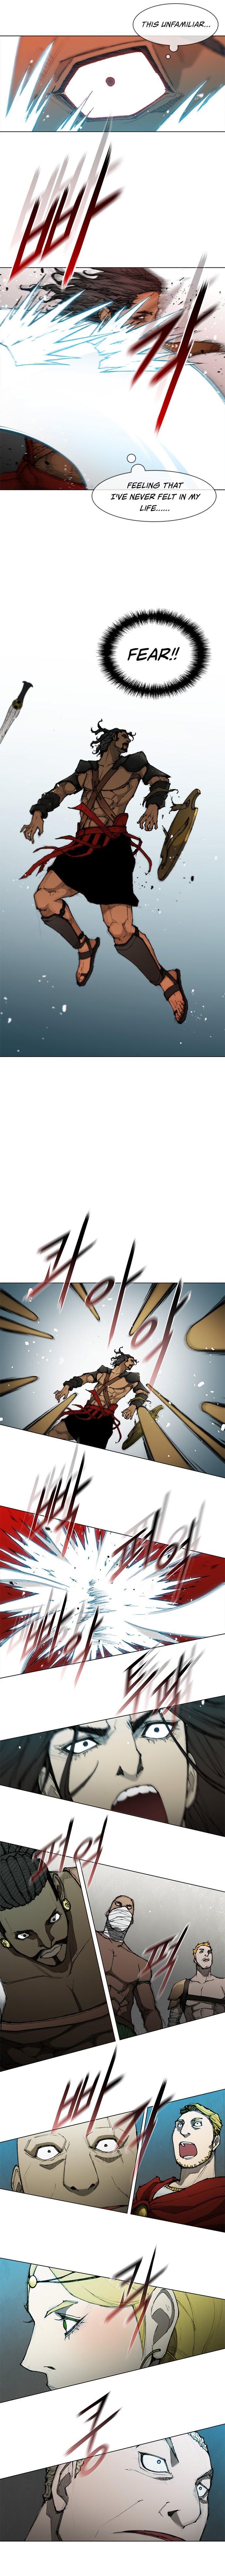 long-way-of-the-warrior-chap-44-6